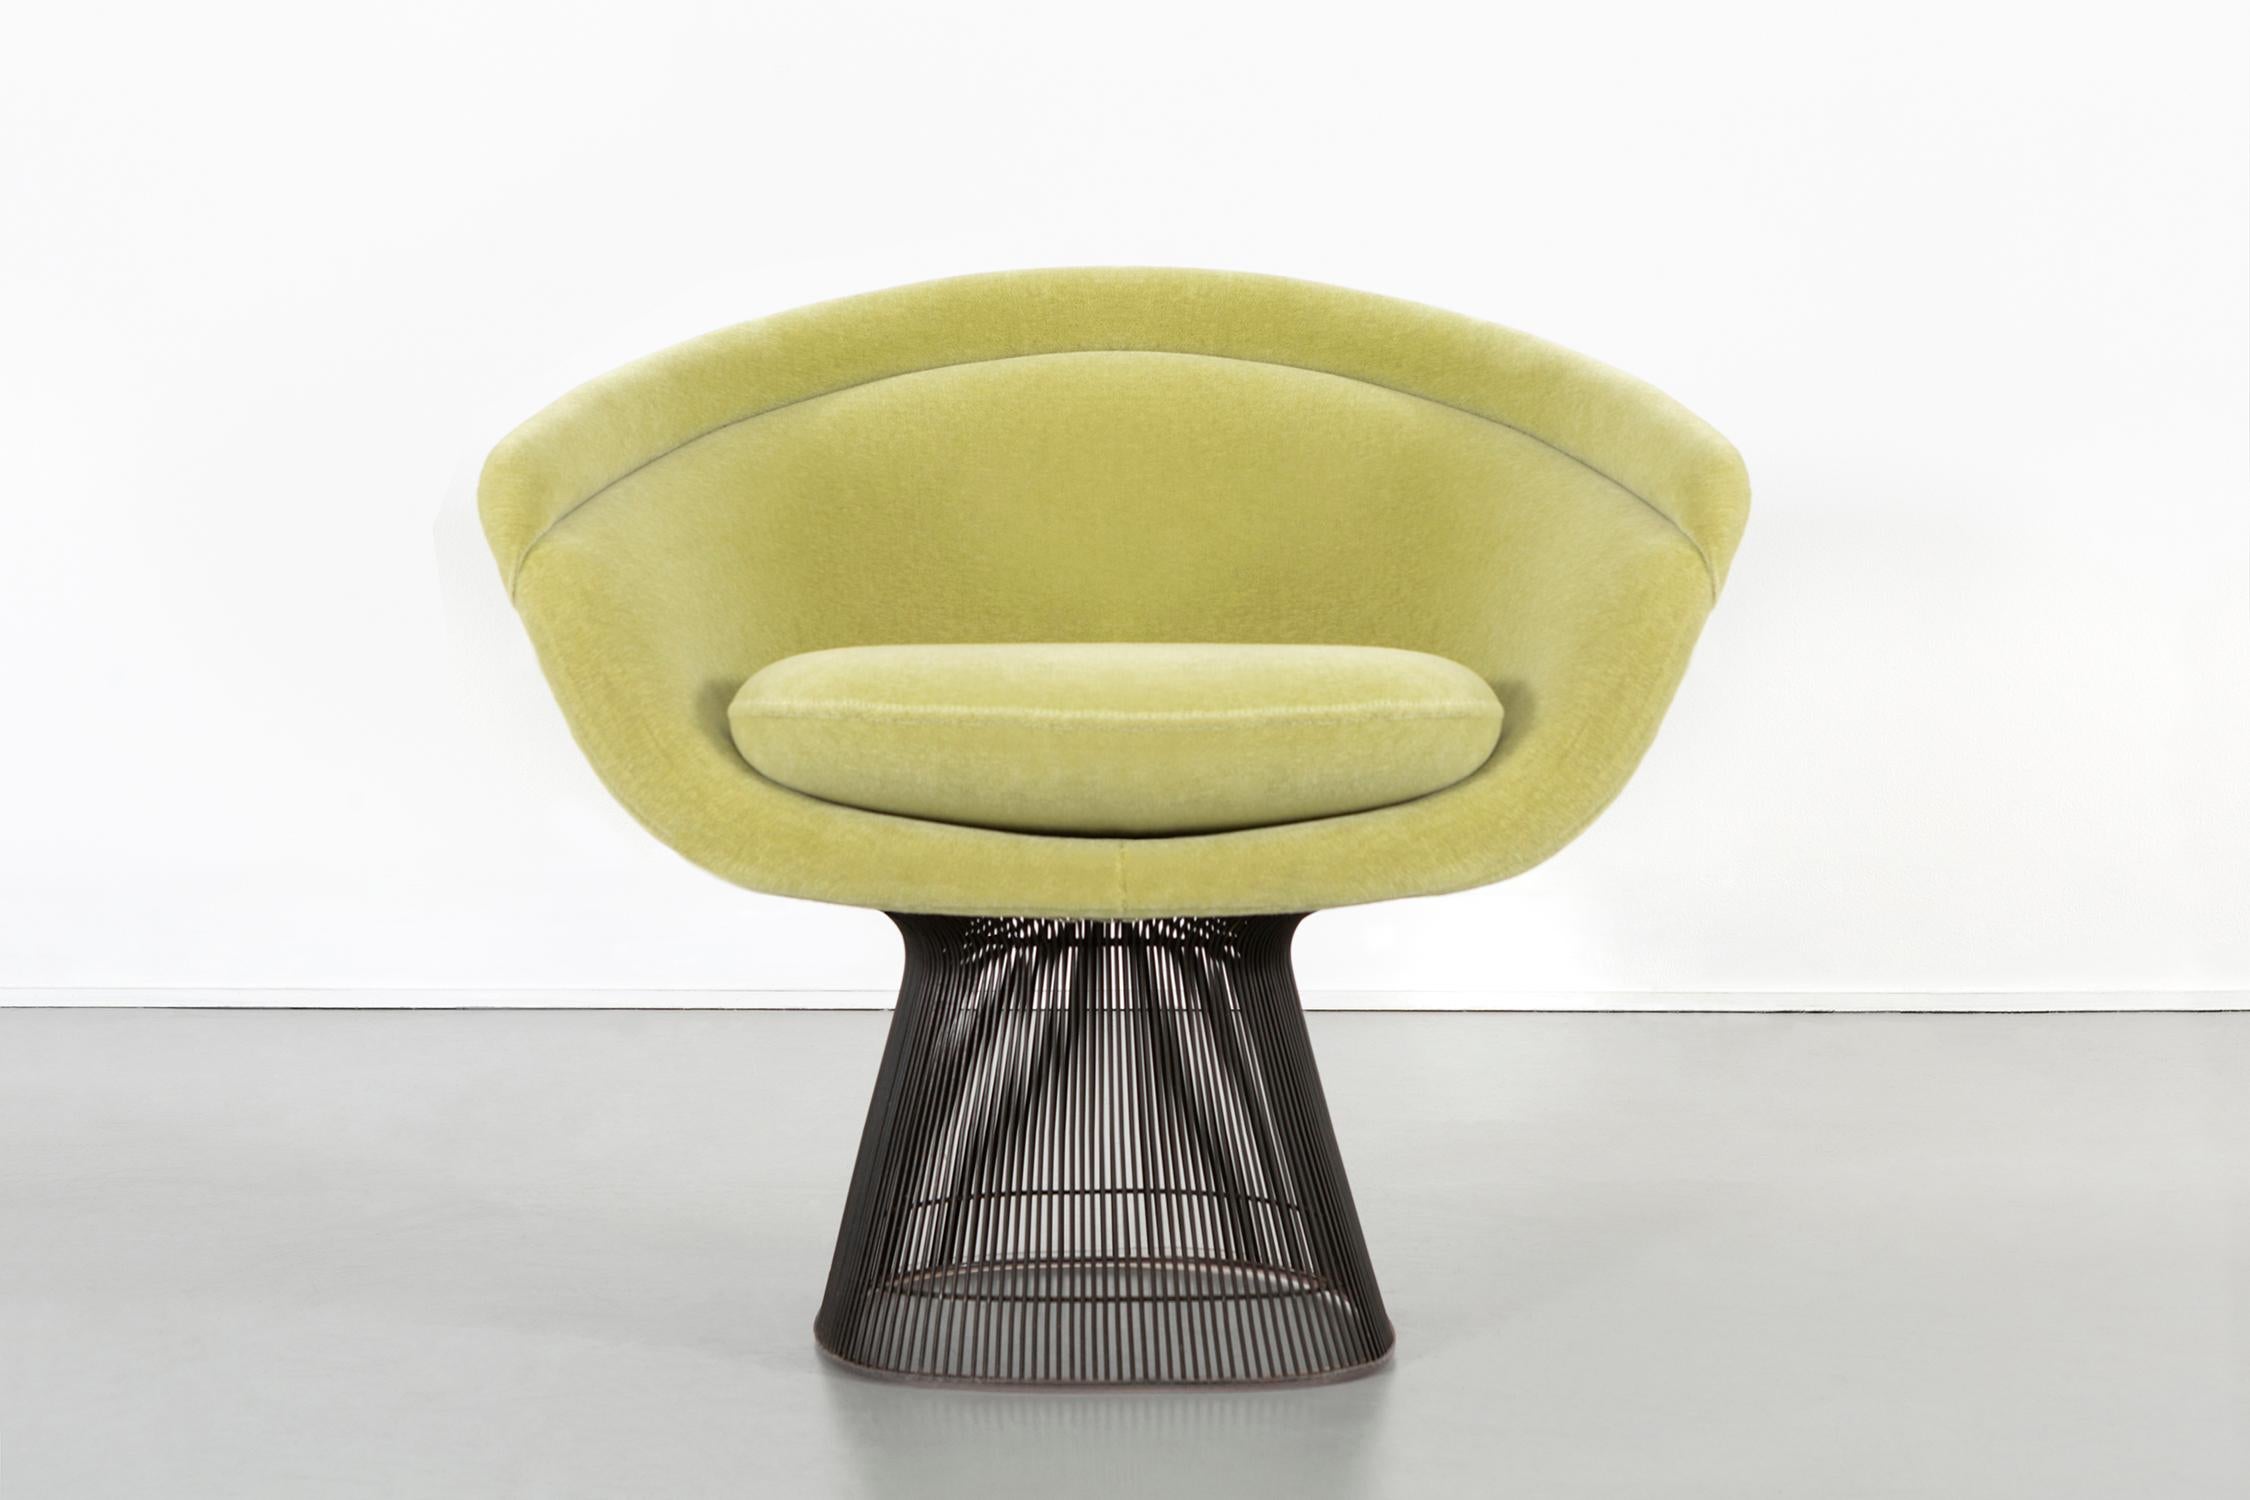 Set of two lounge chairs

designed by Warren Platner for Knoll.

USA, manufactured circa 1975.

Bronze frames freshly reupholstered in mohair 

Measures: 36 ¾” H x 36 ½” W x 25” D x seat 20” H.

Fabric sample available upon request.